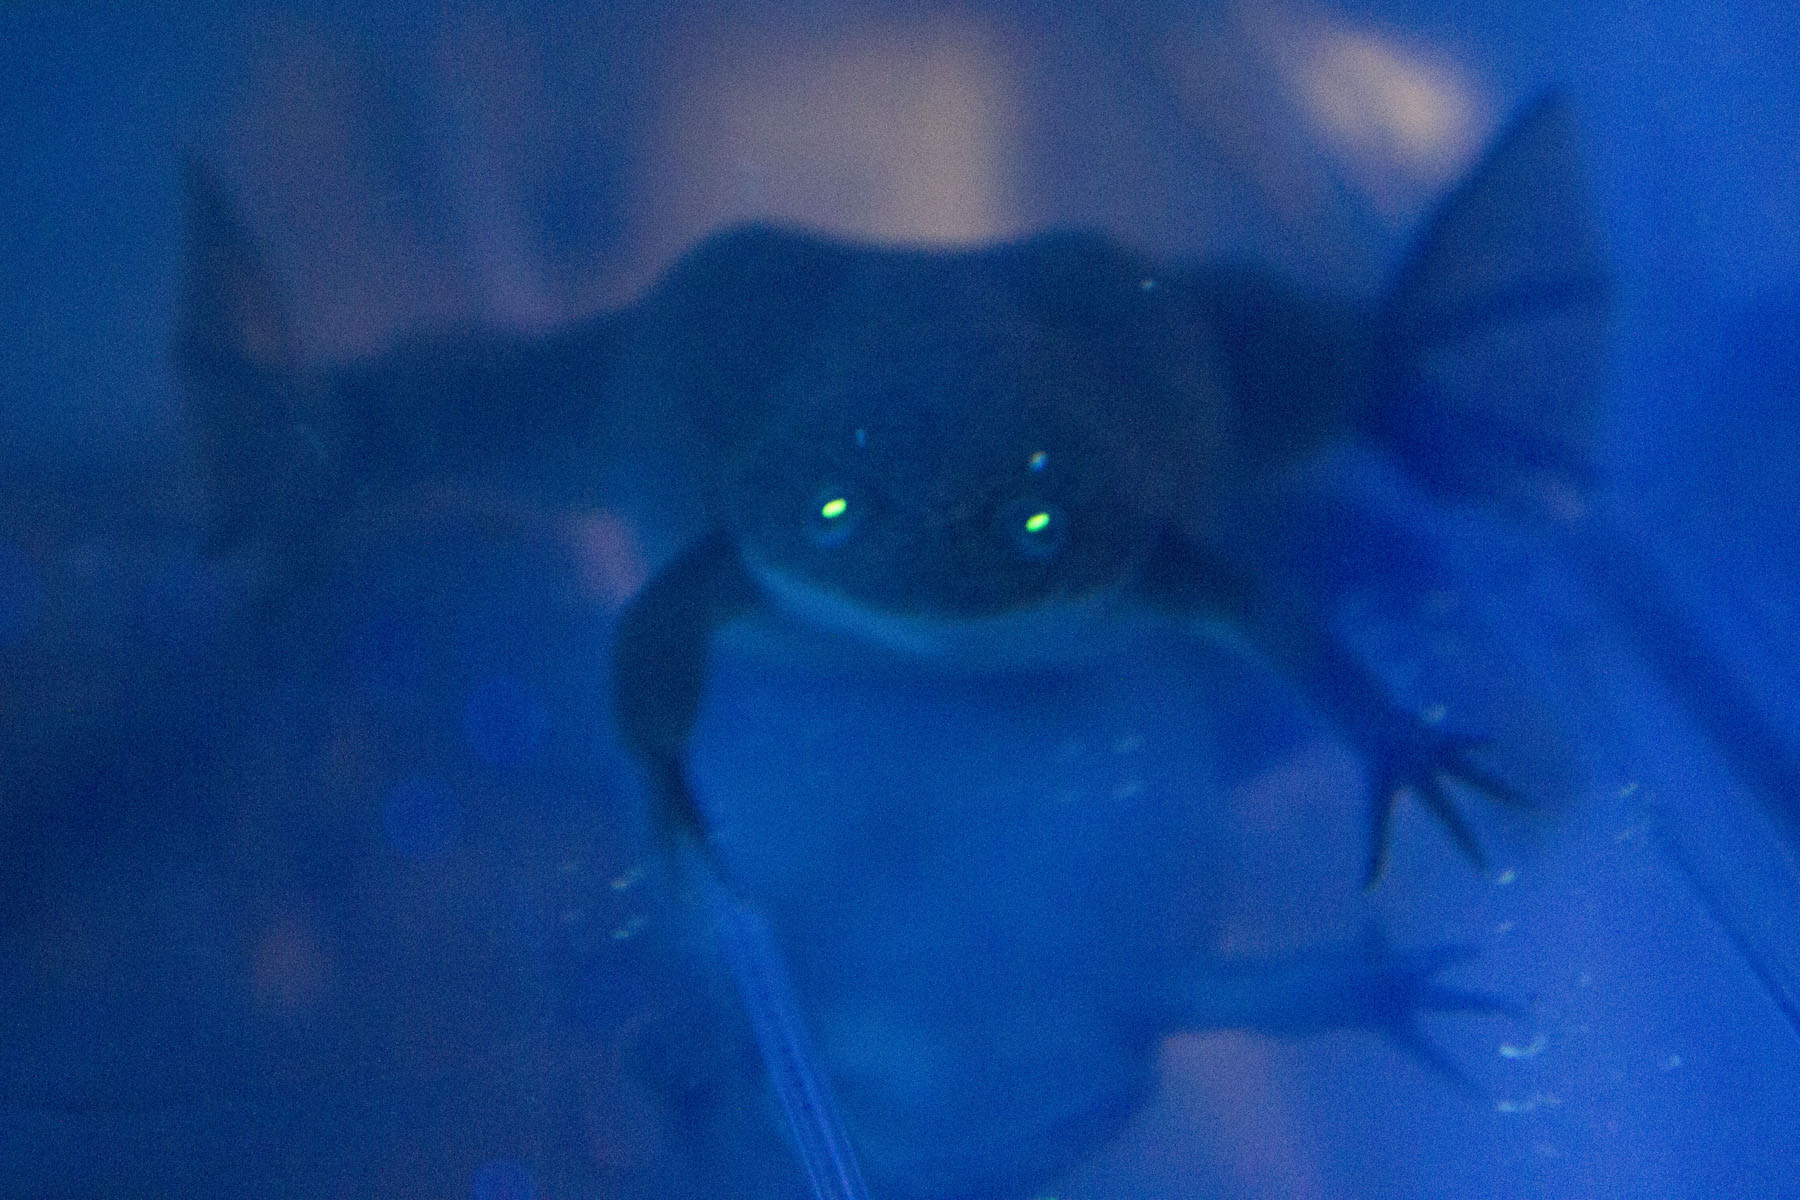 A transgenic frog with bright lime green eyes